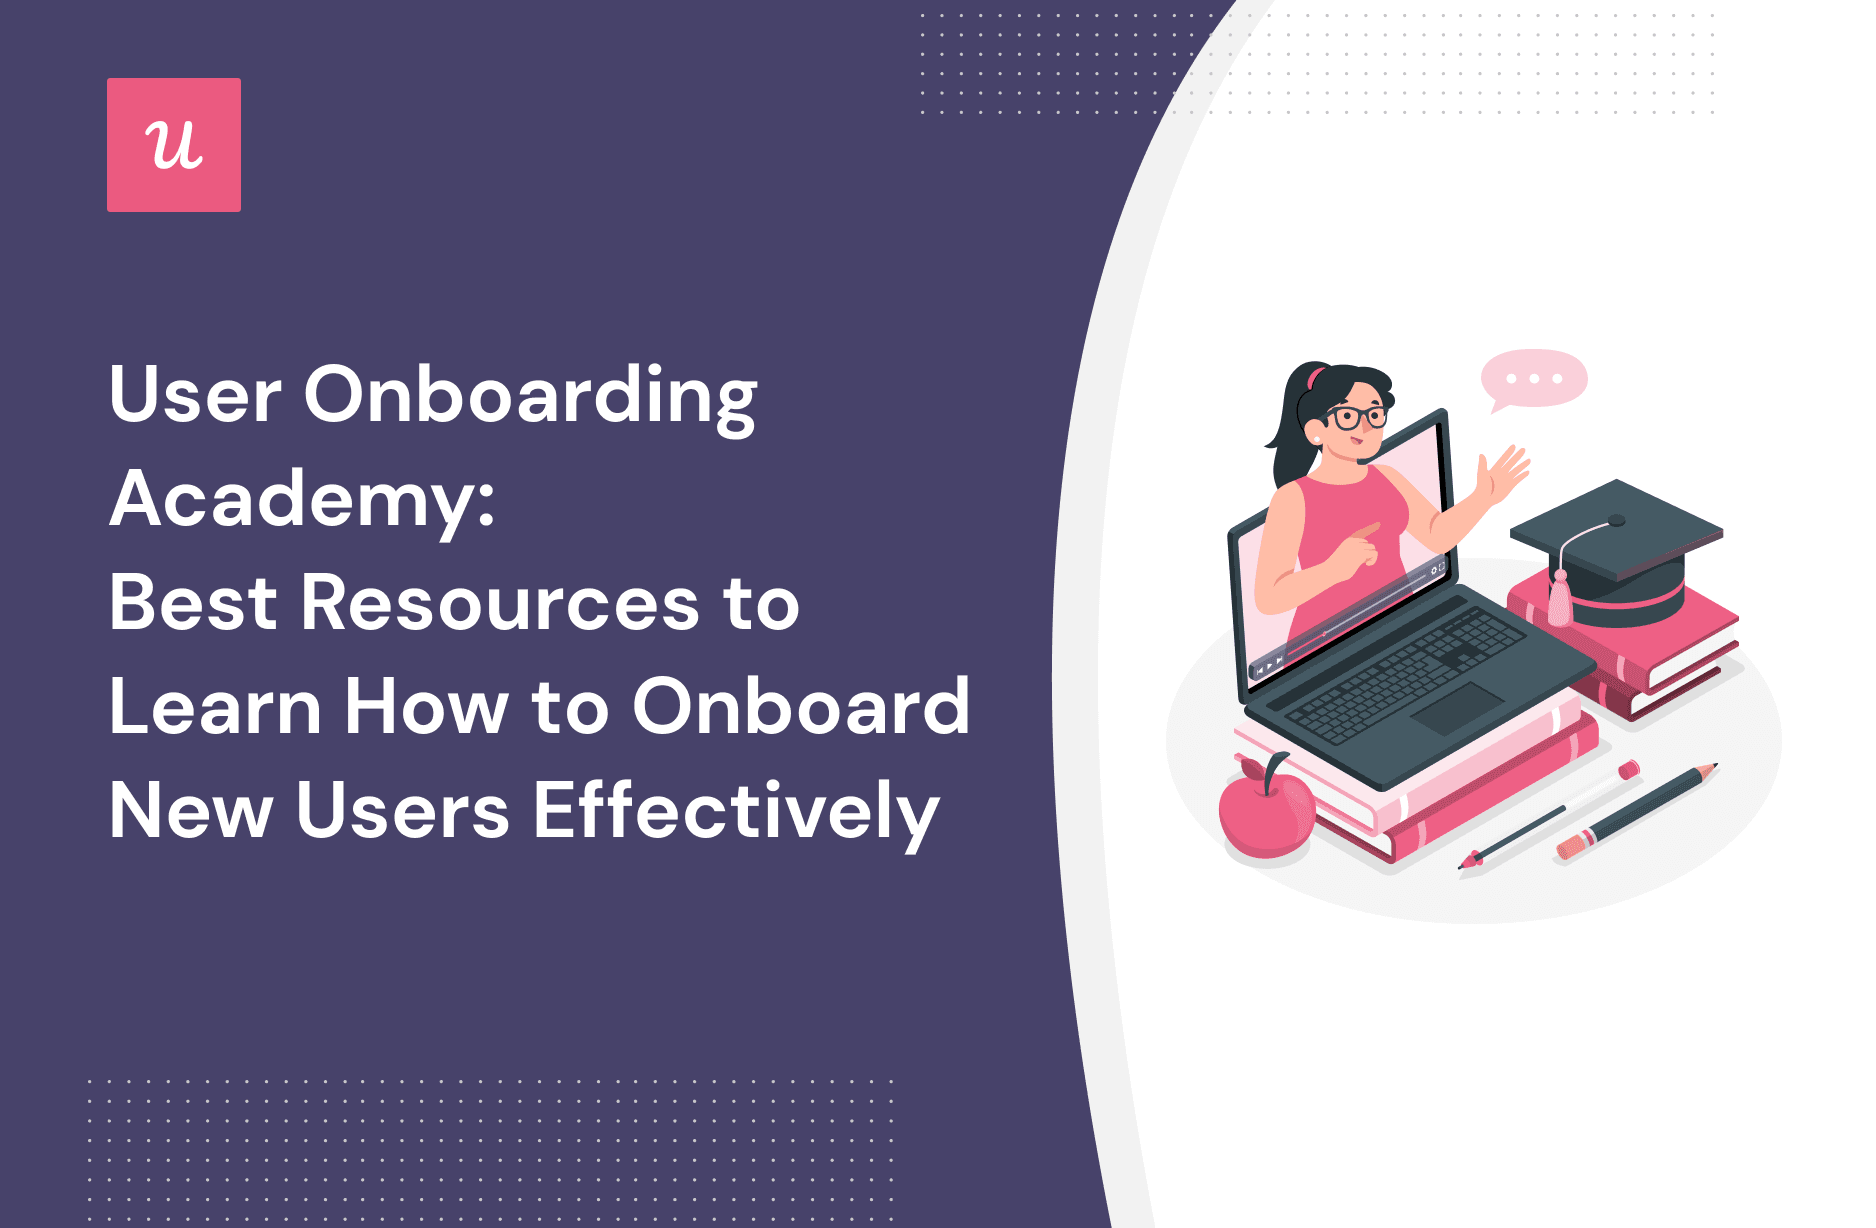 User Onboarding Academy: Best Resources To Learn How to Onboard New Users Effectively cover